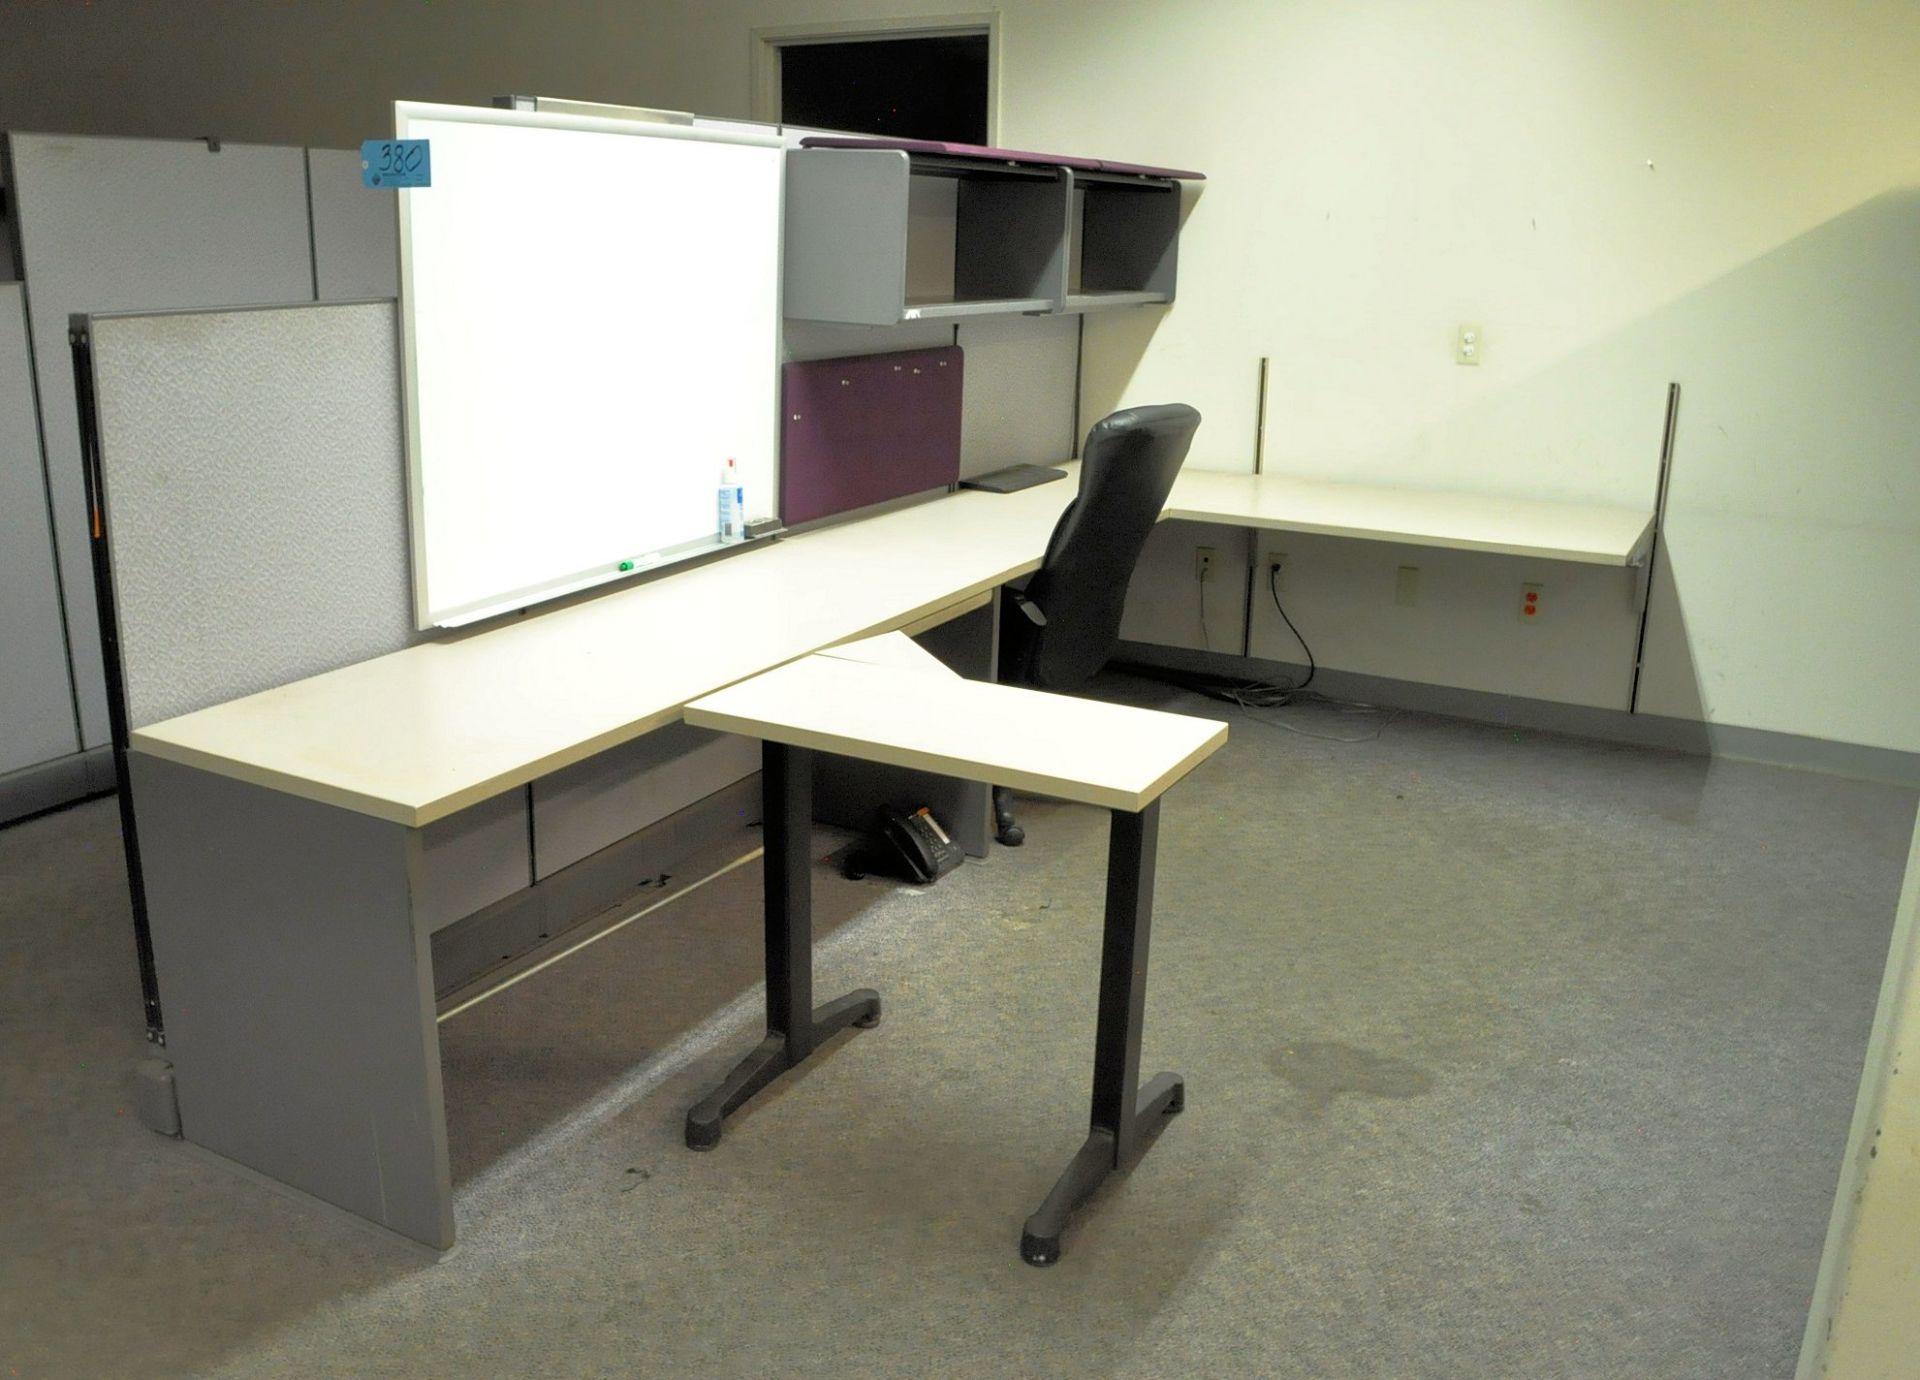 Lot-Cubical Partition Work Systems in (1) Group in (1) Office, - Image 7 of 7